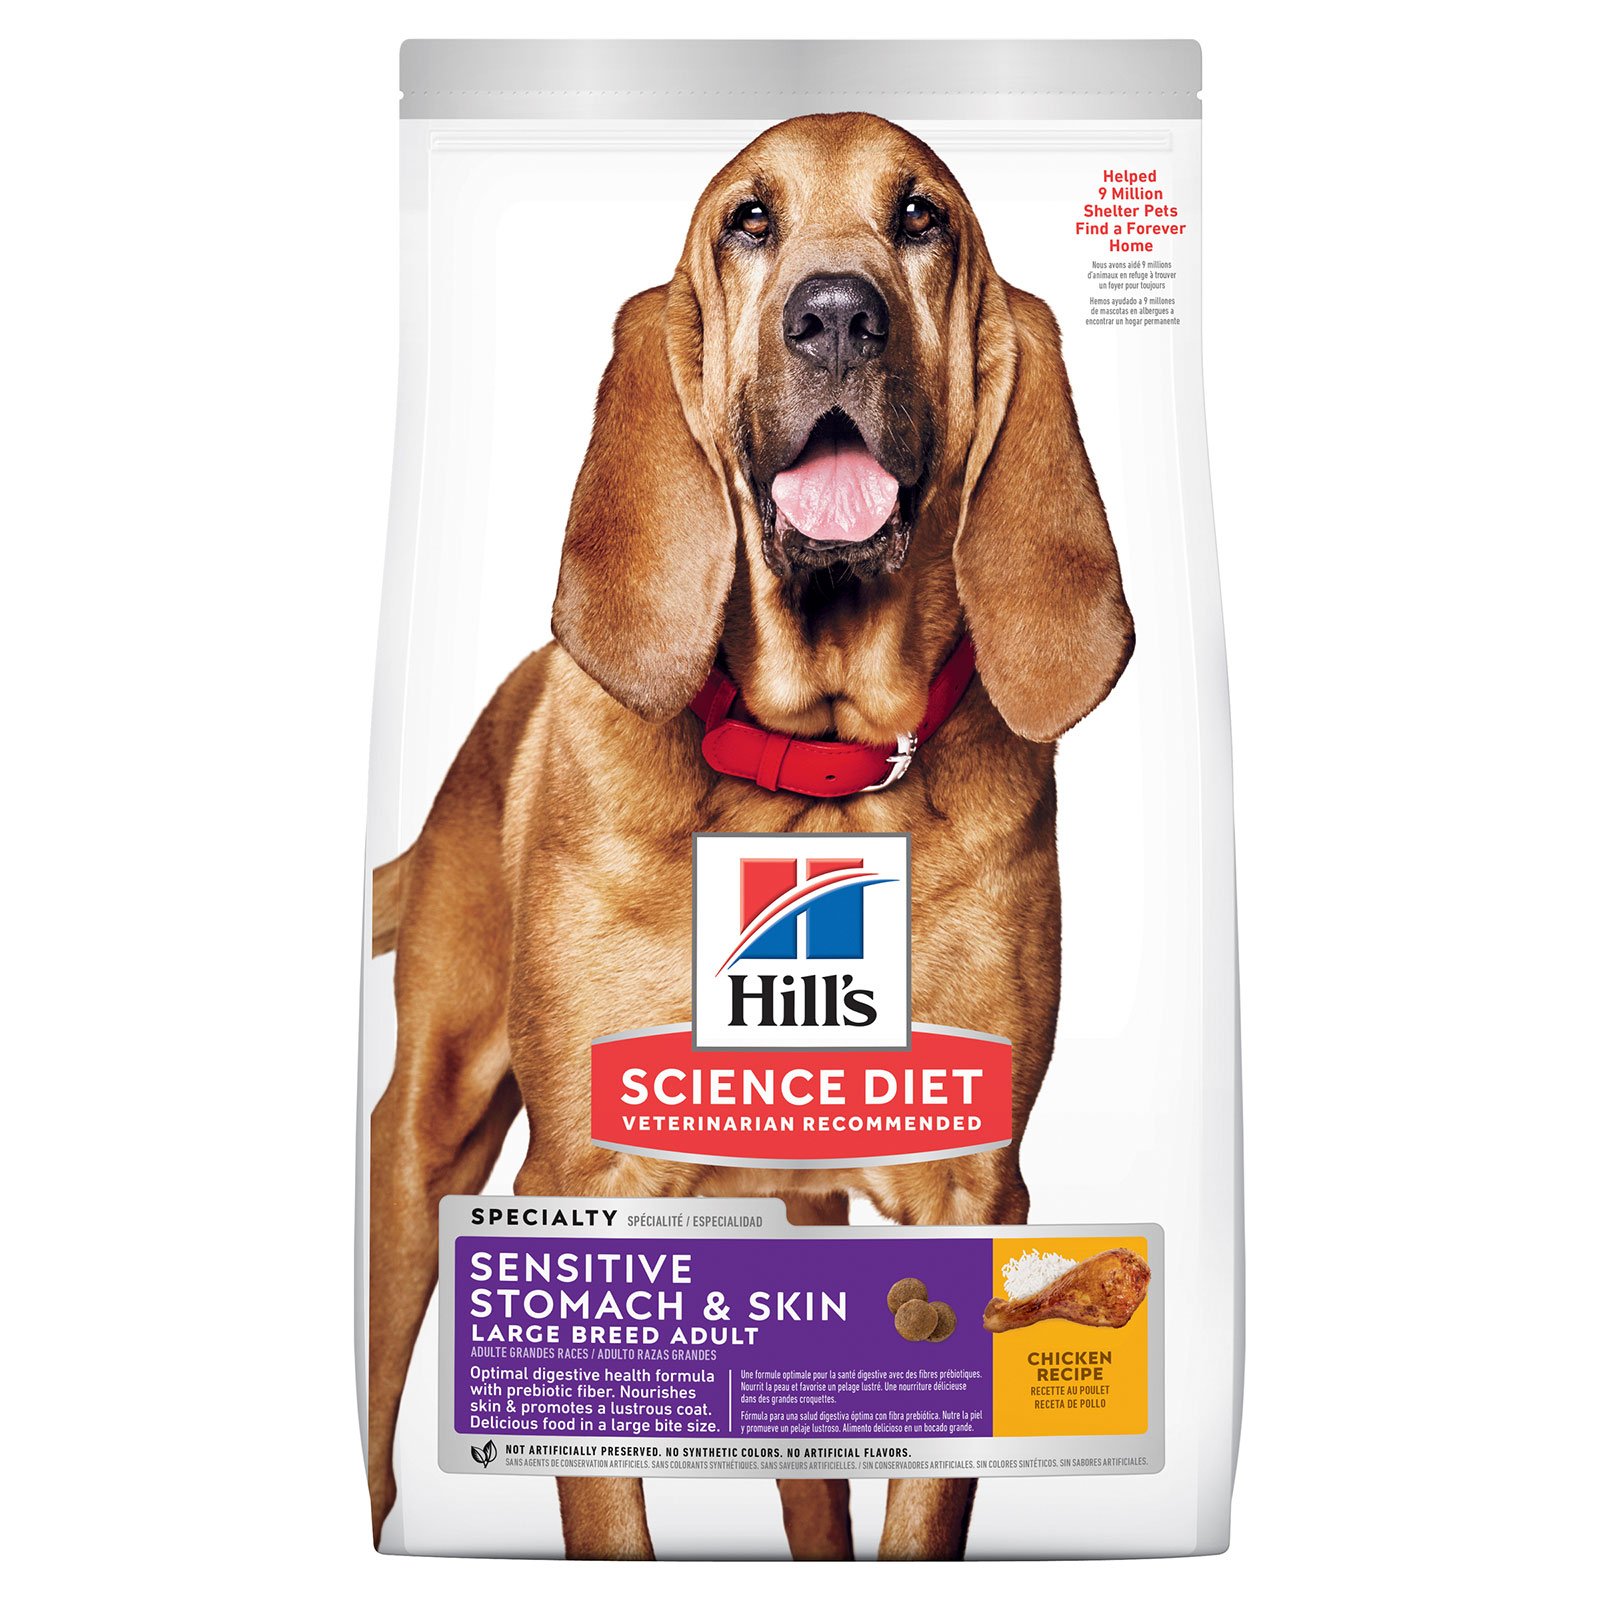 Hill's Science Diet Adult Sensitive Stomach & Skin Large Breed Dog Food 